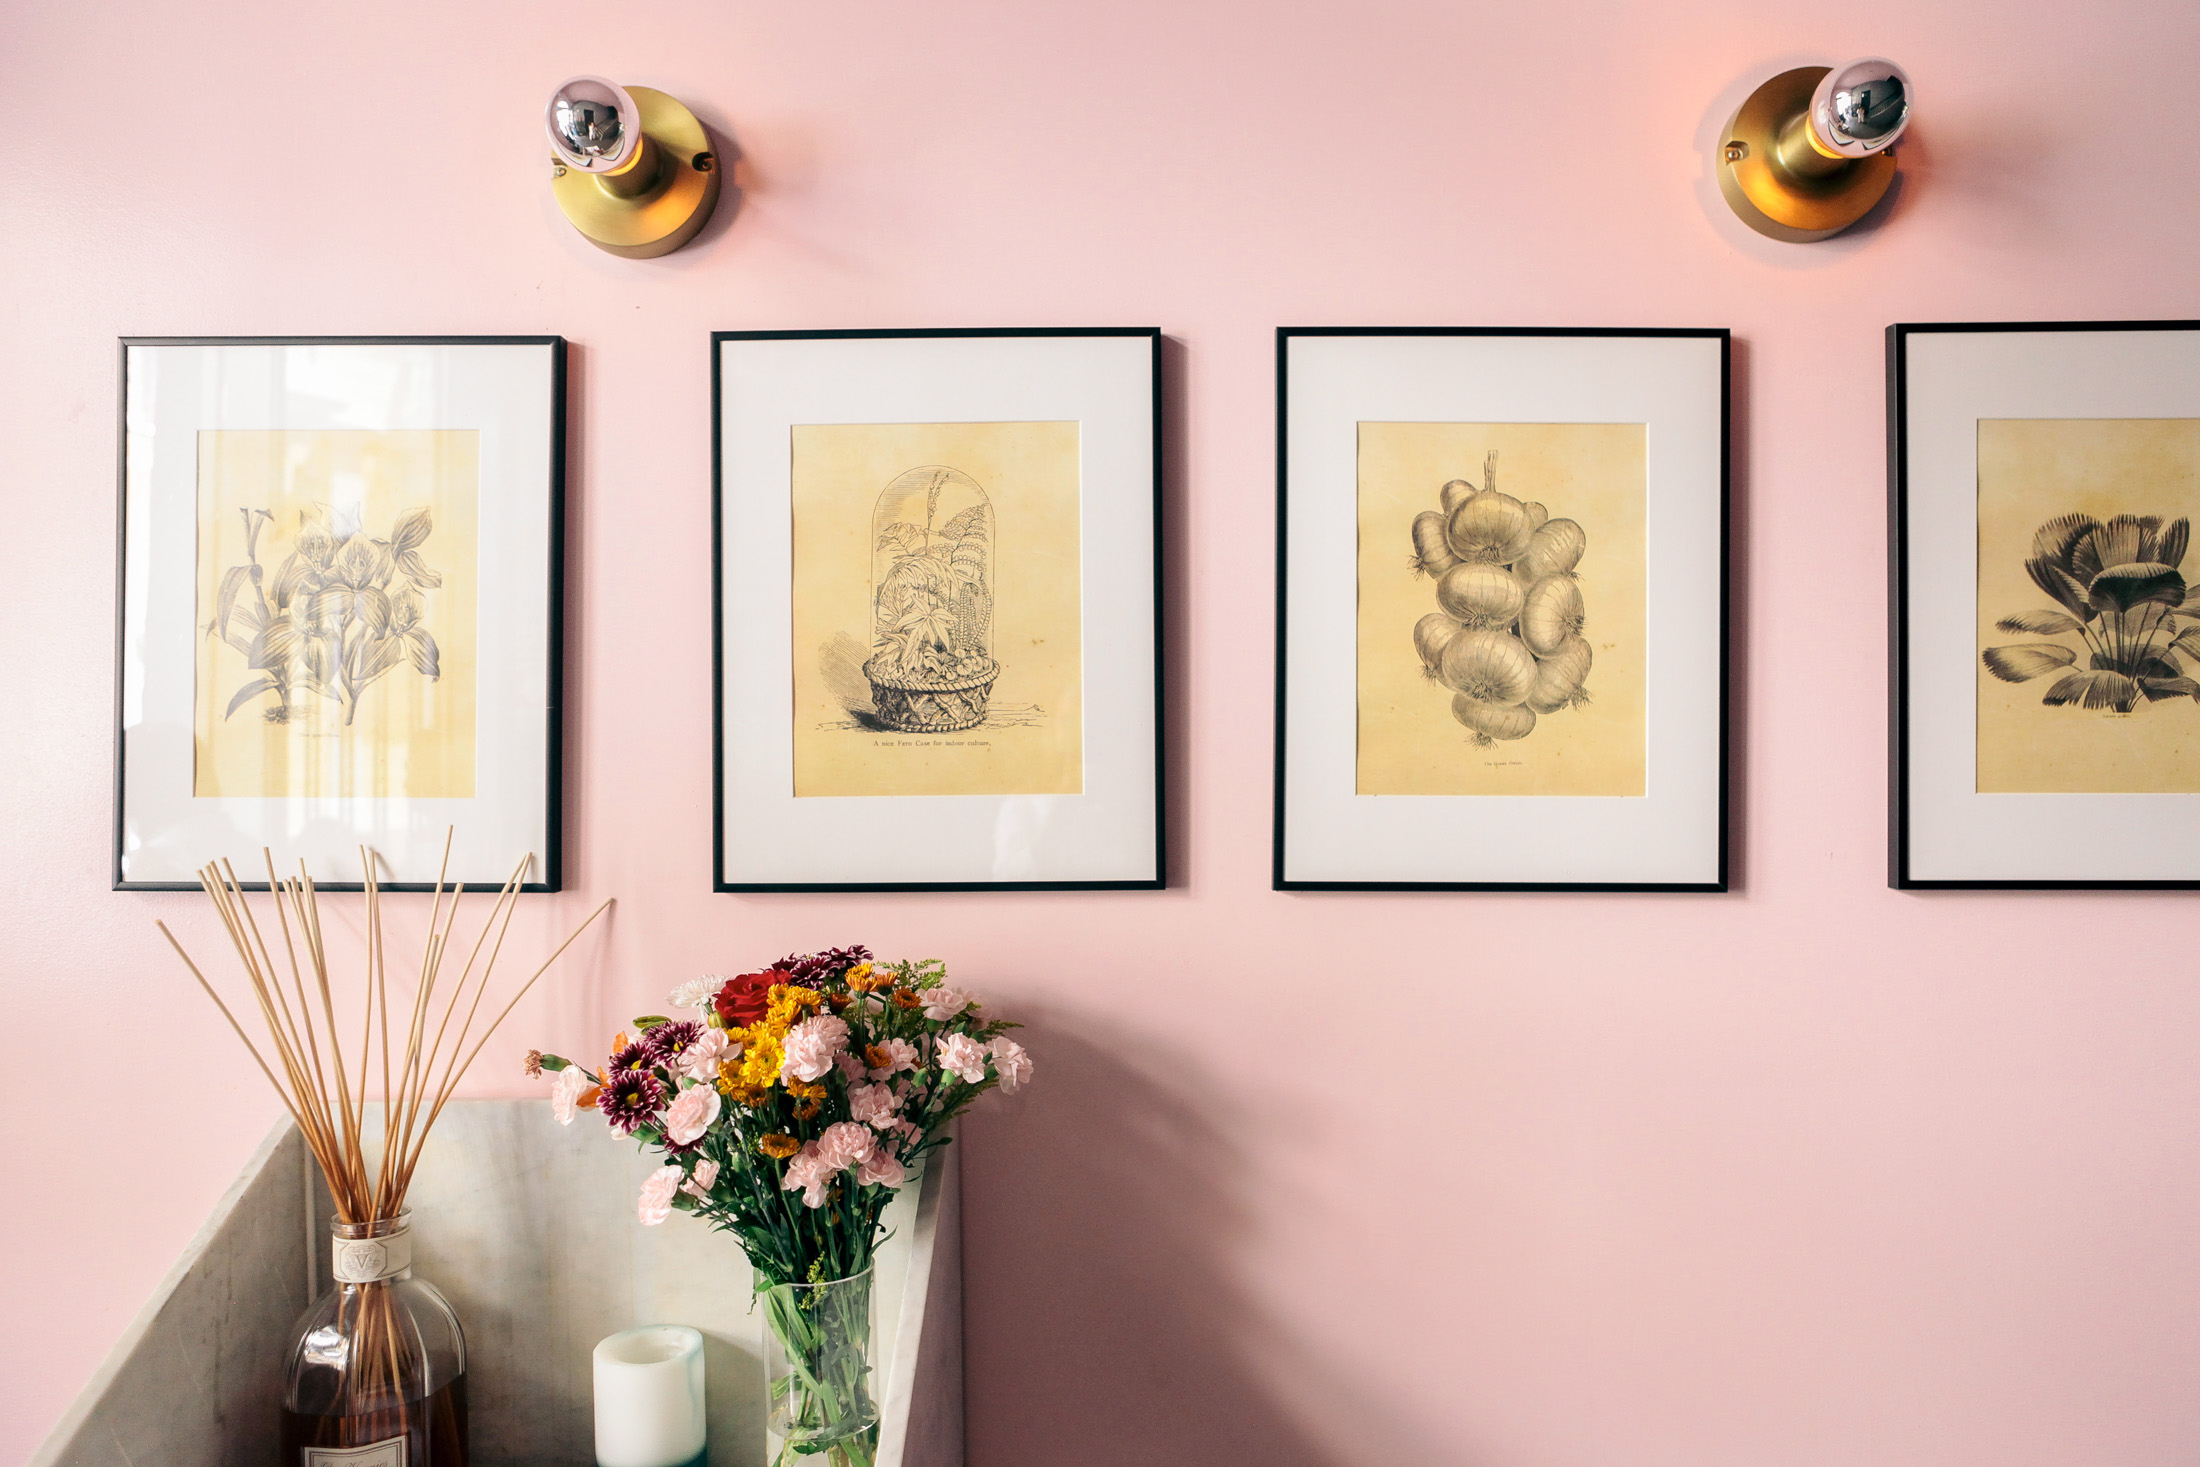 Decorating with vintage illustrations